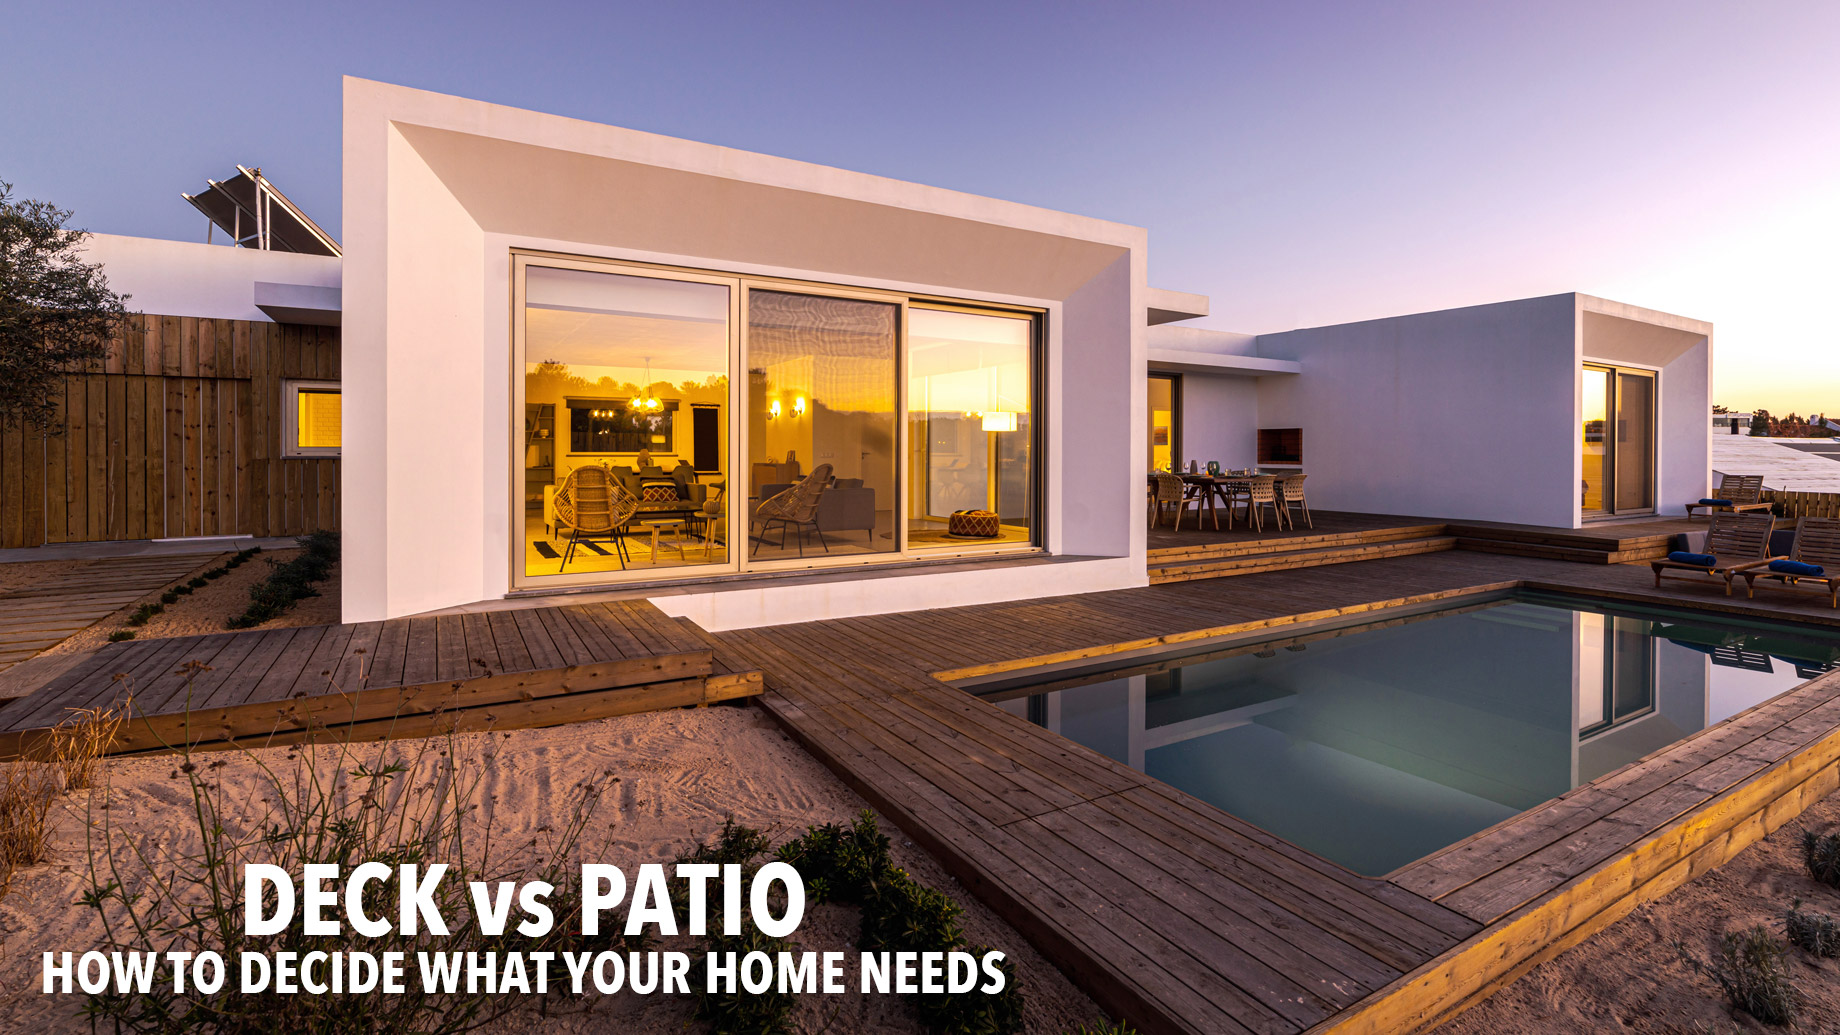 Deck vs. Patio - How to Decide What Your Home Needs